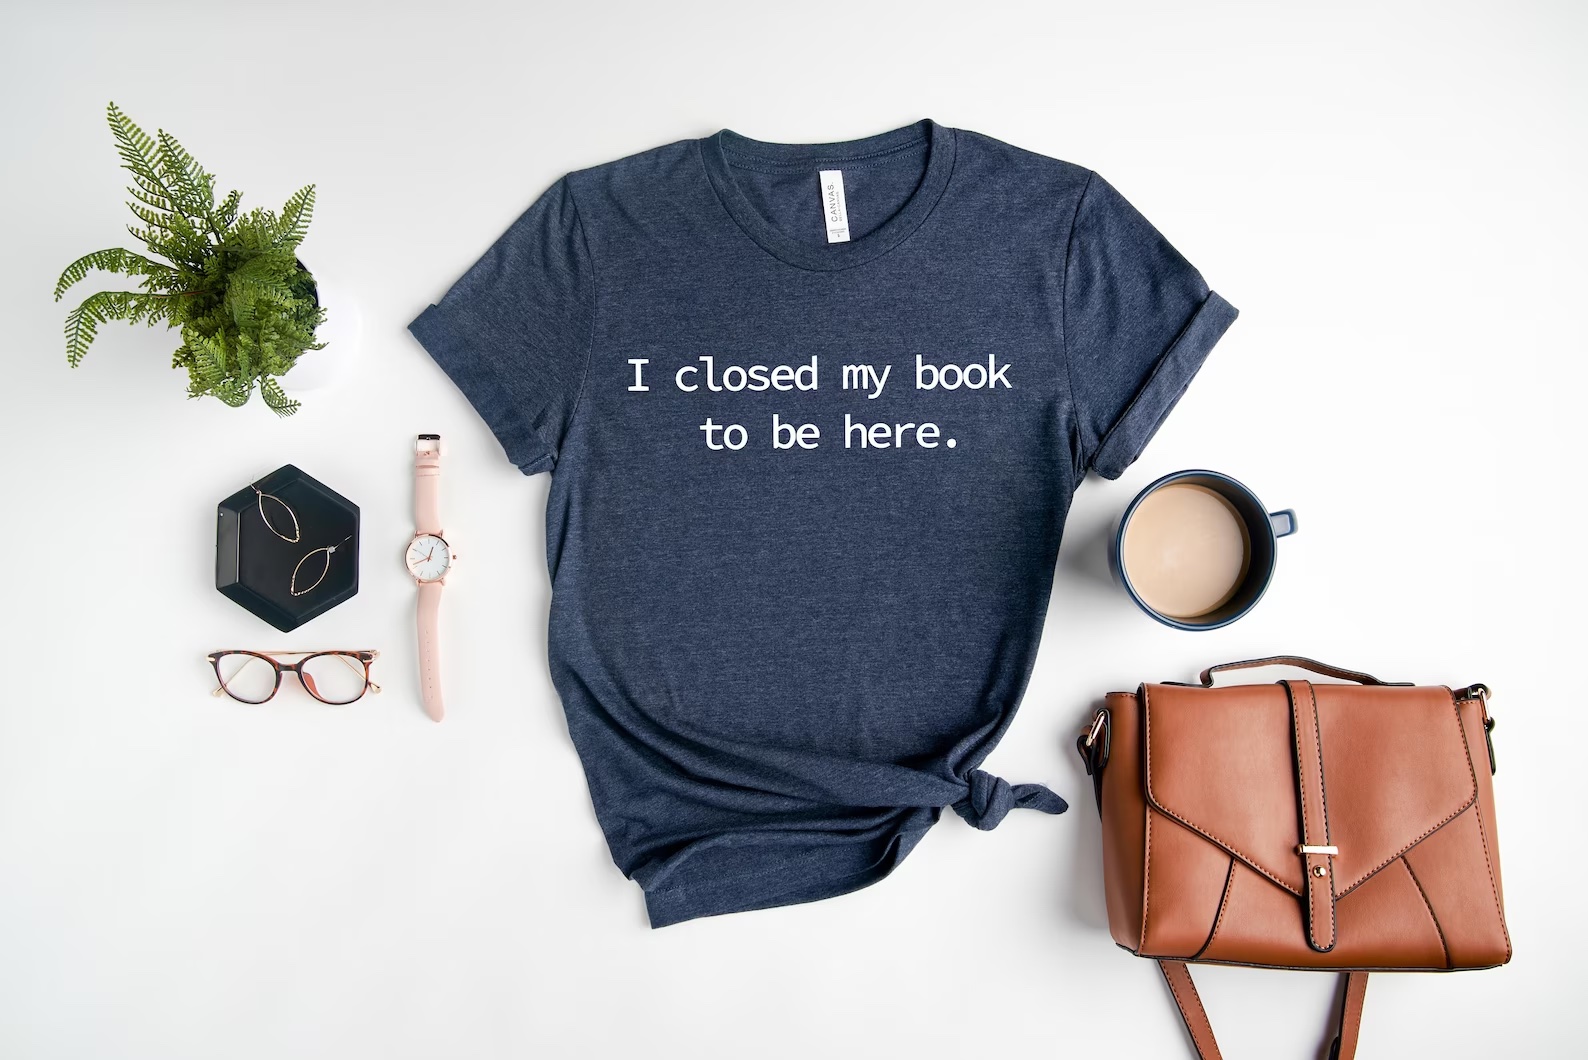 a photo of a blue t-shirt that says, "I closed my book to be here." The shirt is sitting next to a brown back and a plant.